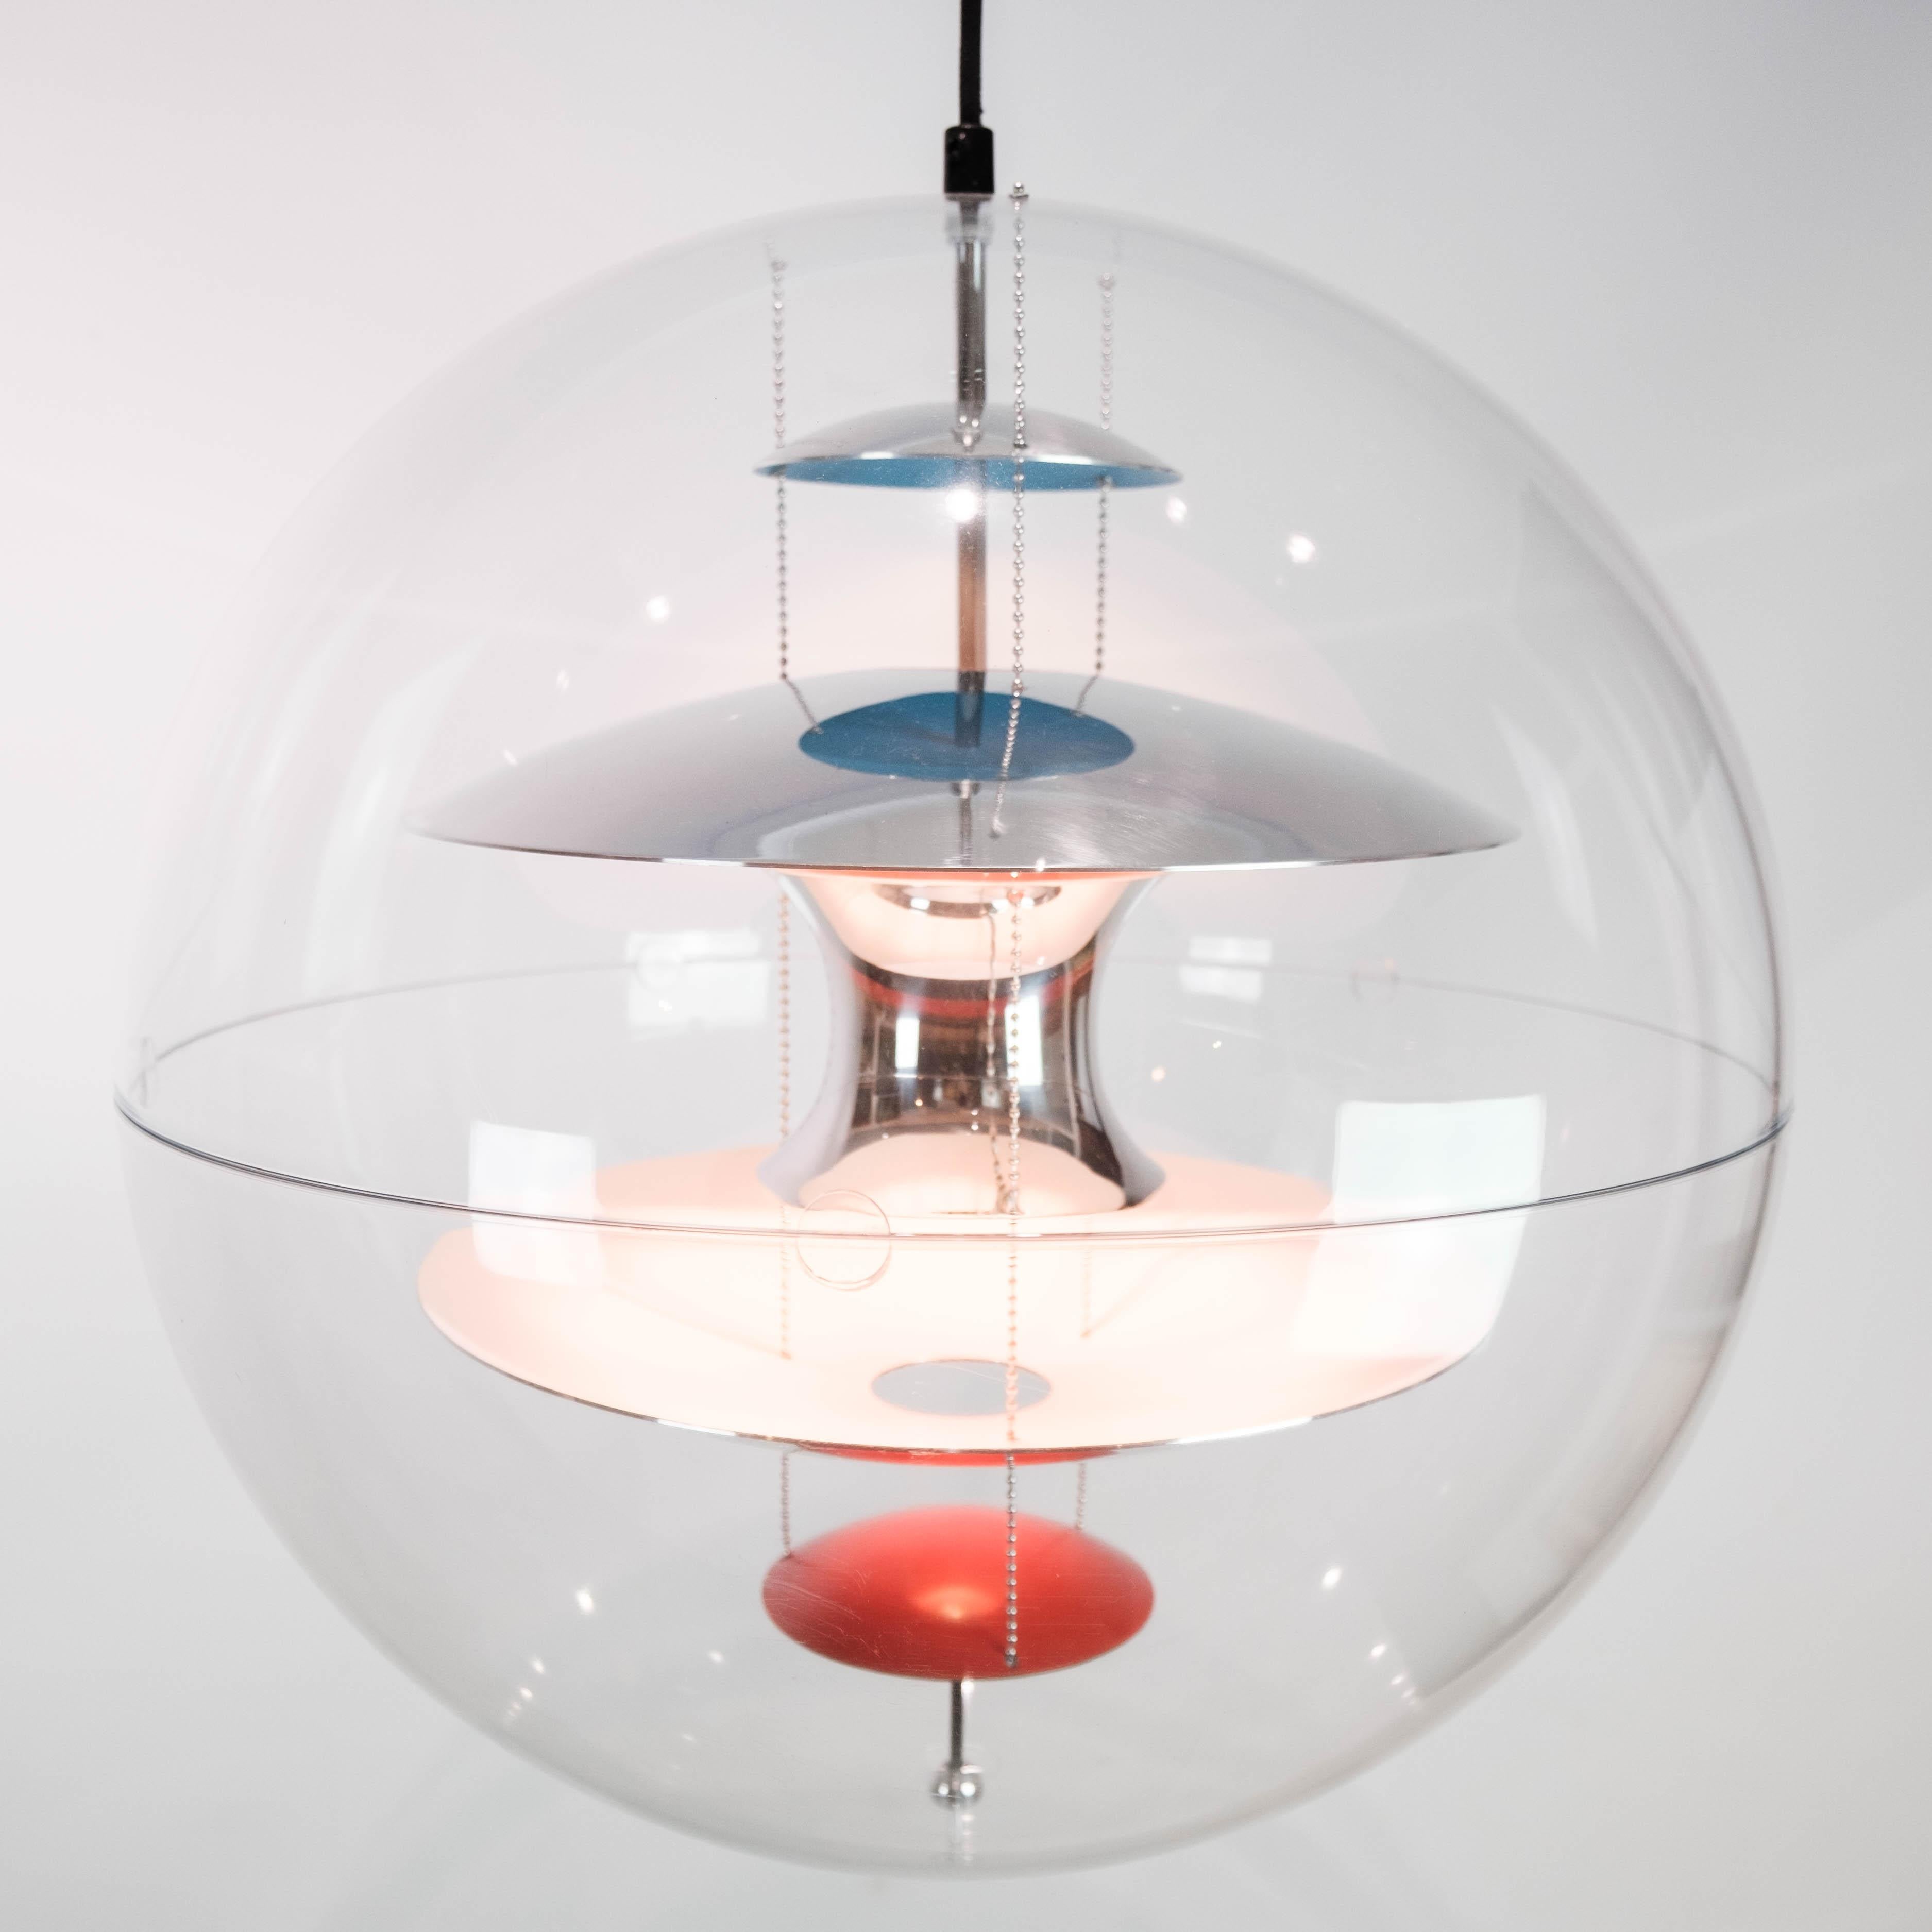 Globe, 50, designed by Verner Panton in 1969. The lamp is a transparent acrylic globe with 5 hanging metal reflectors, which is lacquered in White, blue and red.